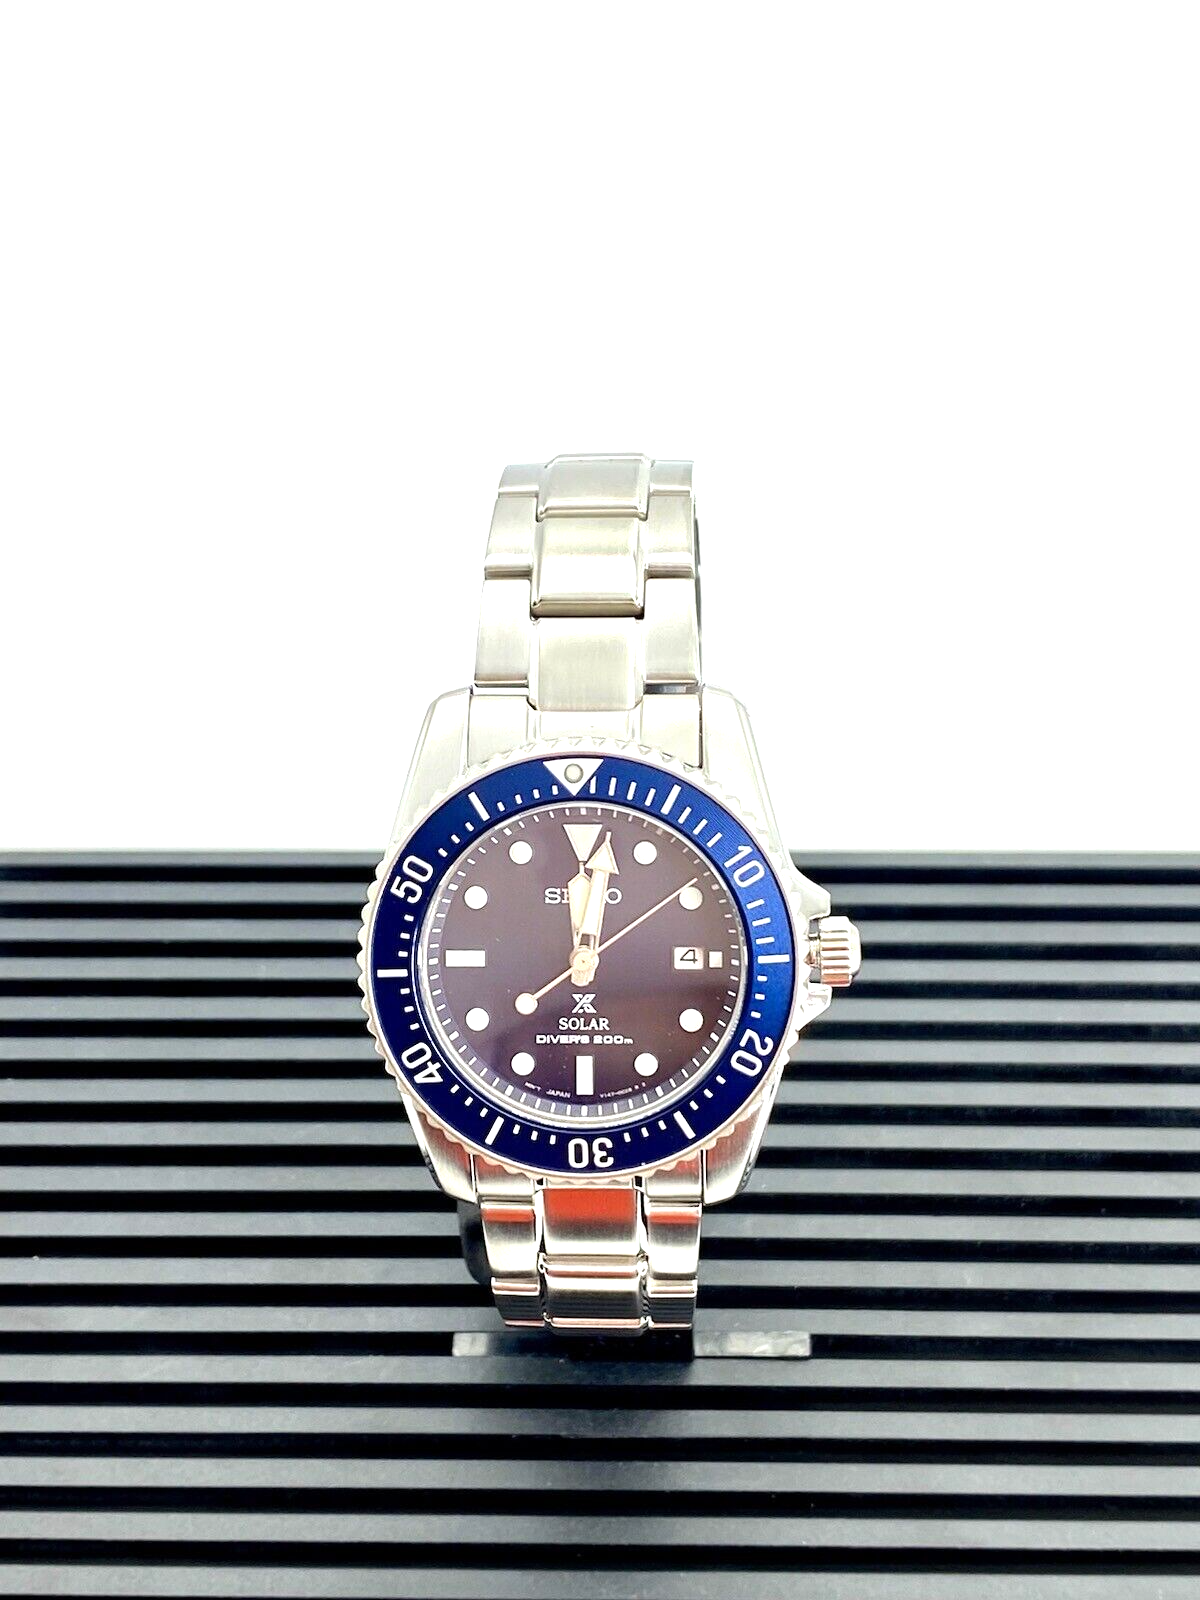 Seiko Prospex Solar Diver's Blue Sunray Dial Stainless Steel Men Watch SNE585